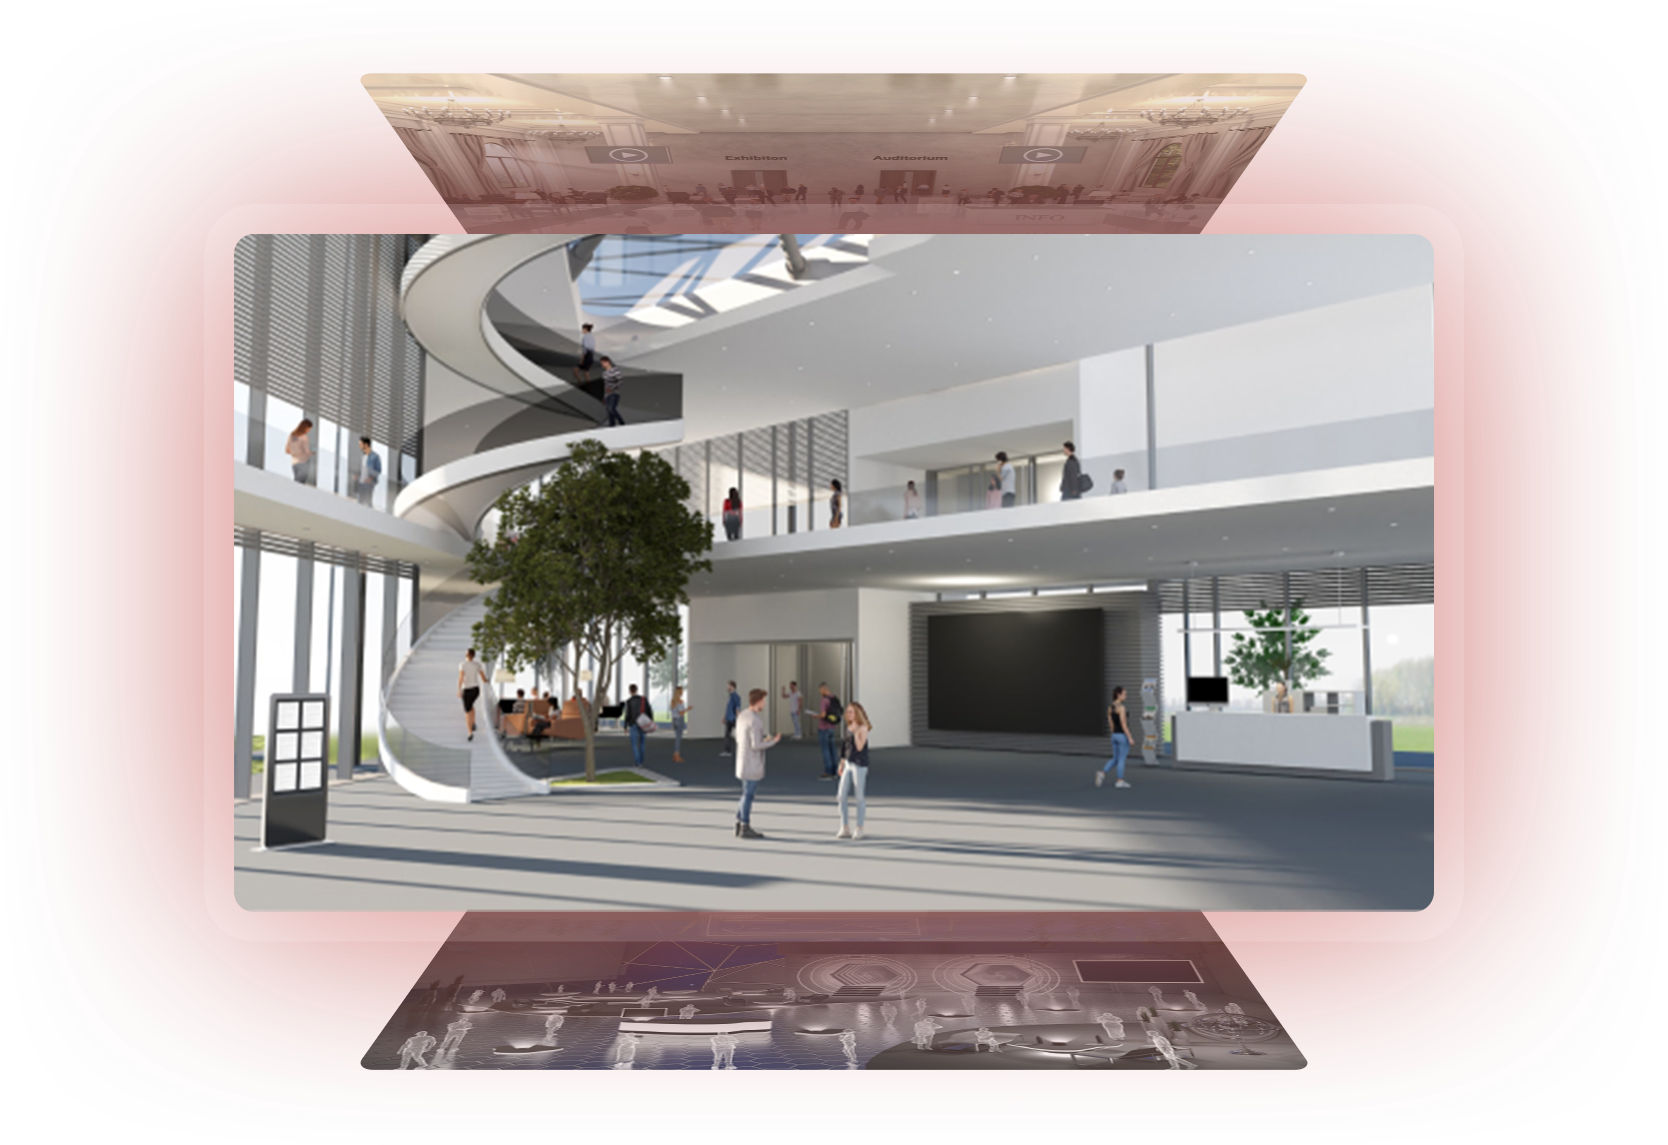 Virtual event platform with 3D-like template based environments.